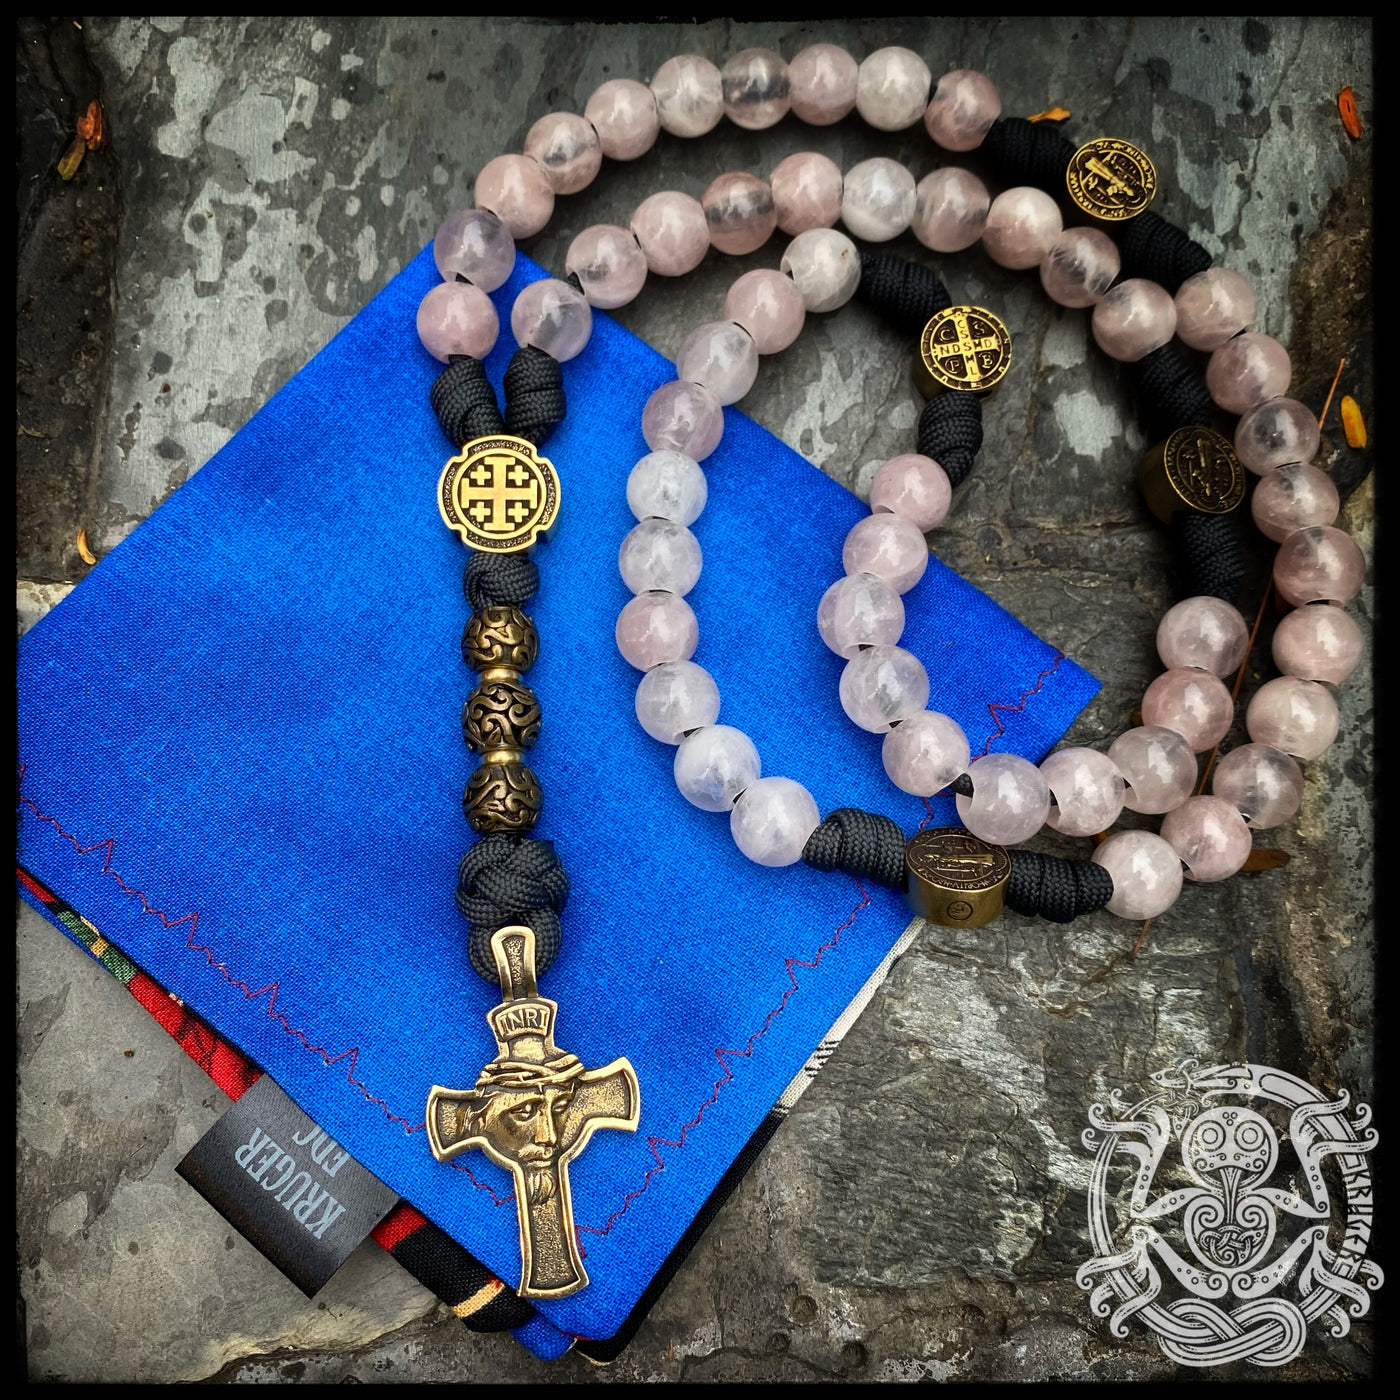 The Guidance Rosary